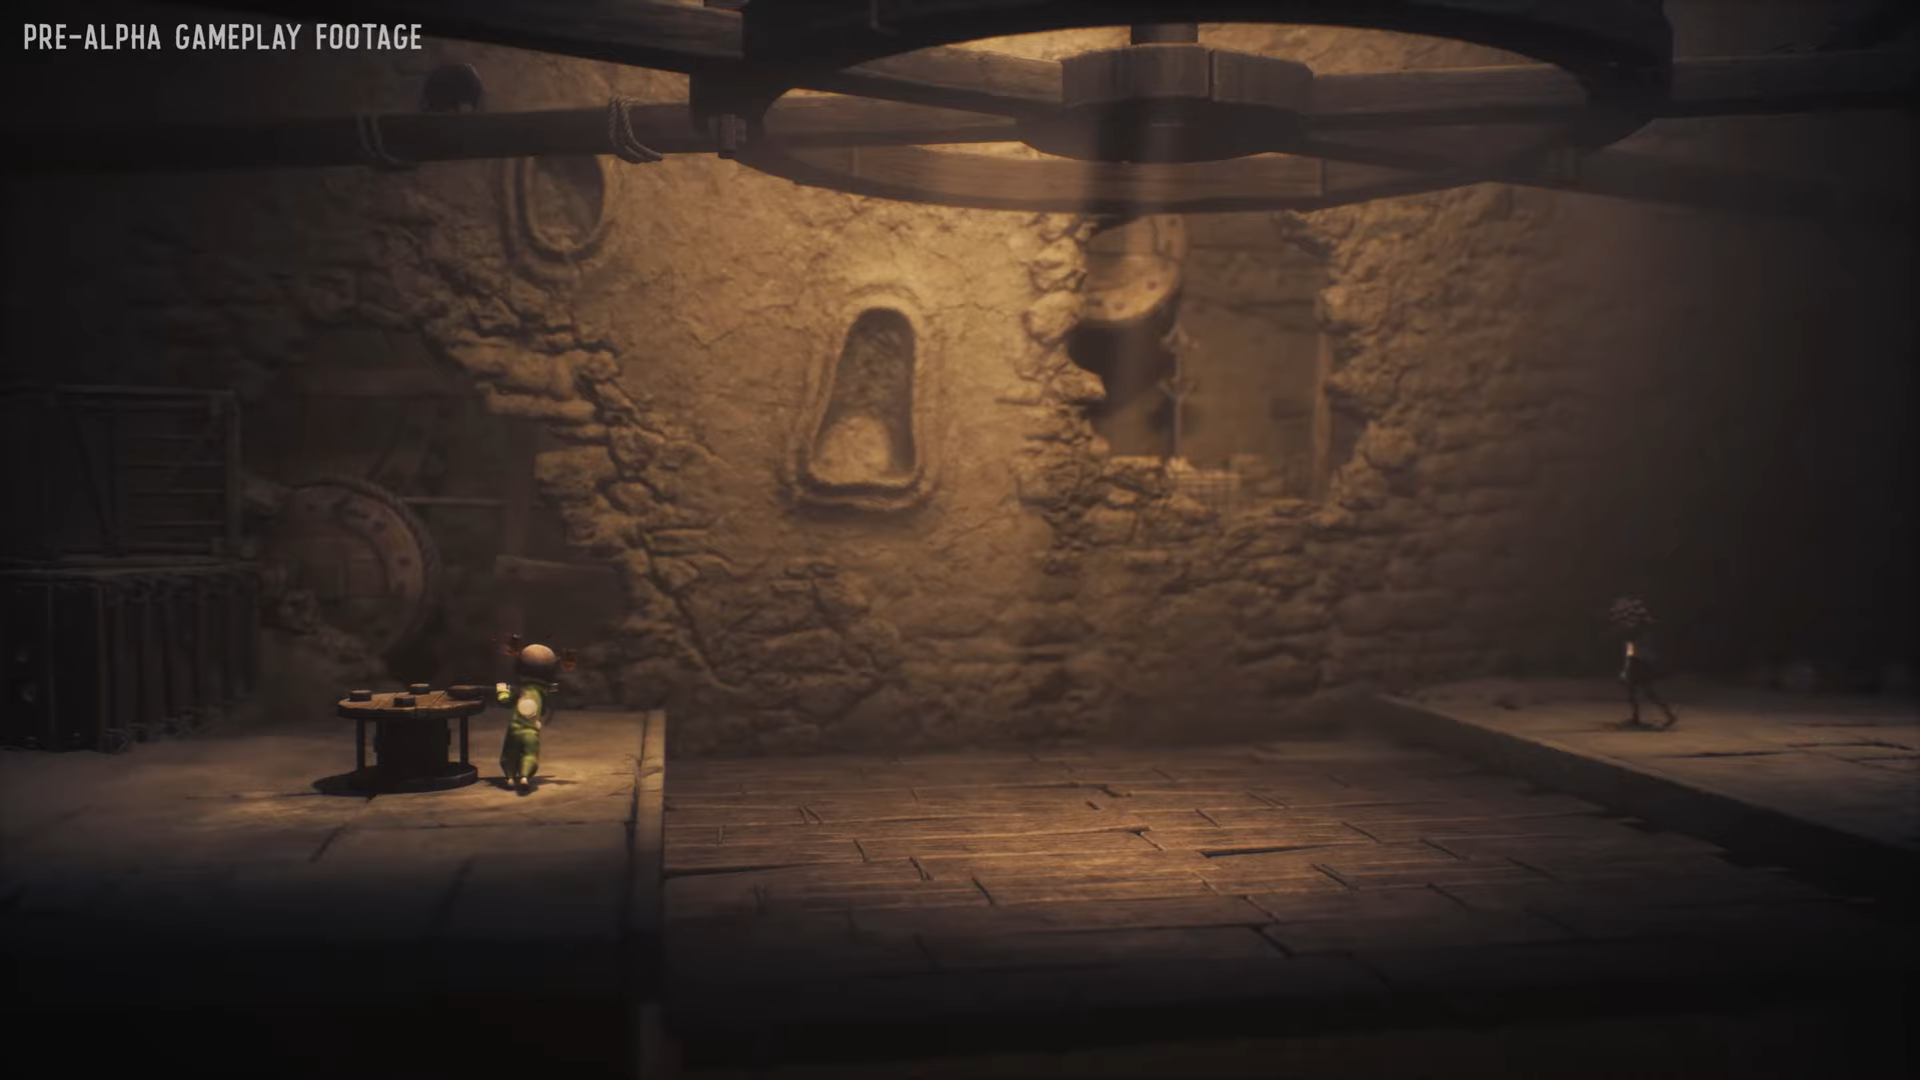 Little Nightmares Now Available On Mobile - Noisy Pixel